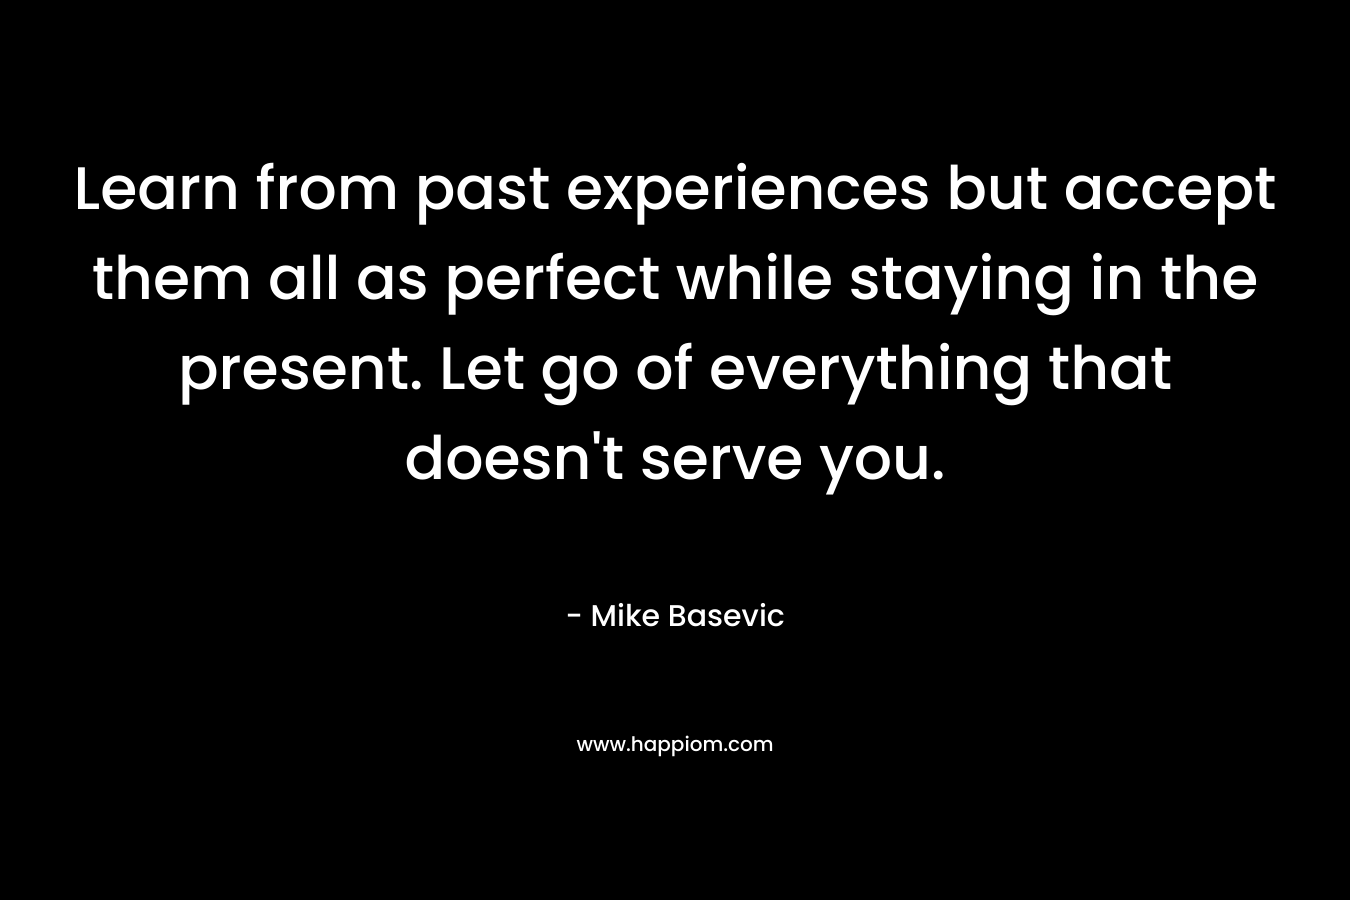 Learn from past experiences but accept them all as perfect while staying in the present. Let go of everything that doesn't serve you.